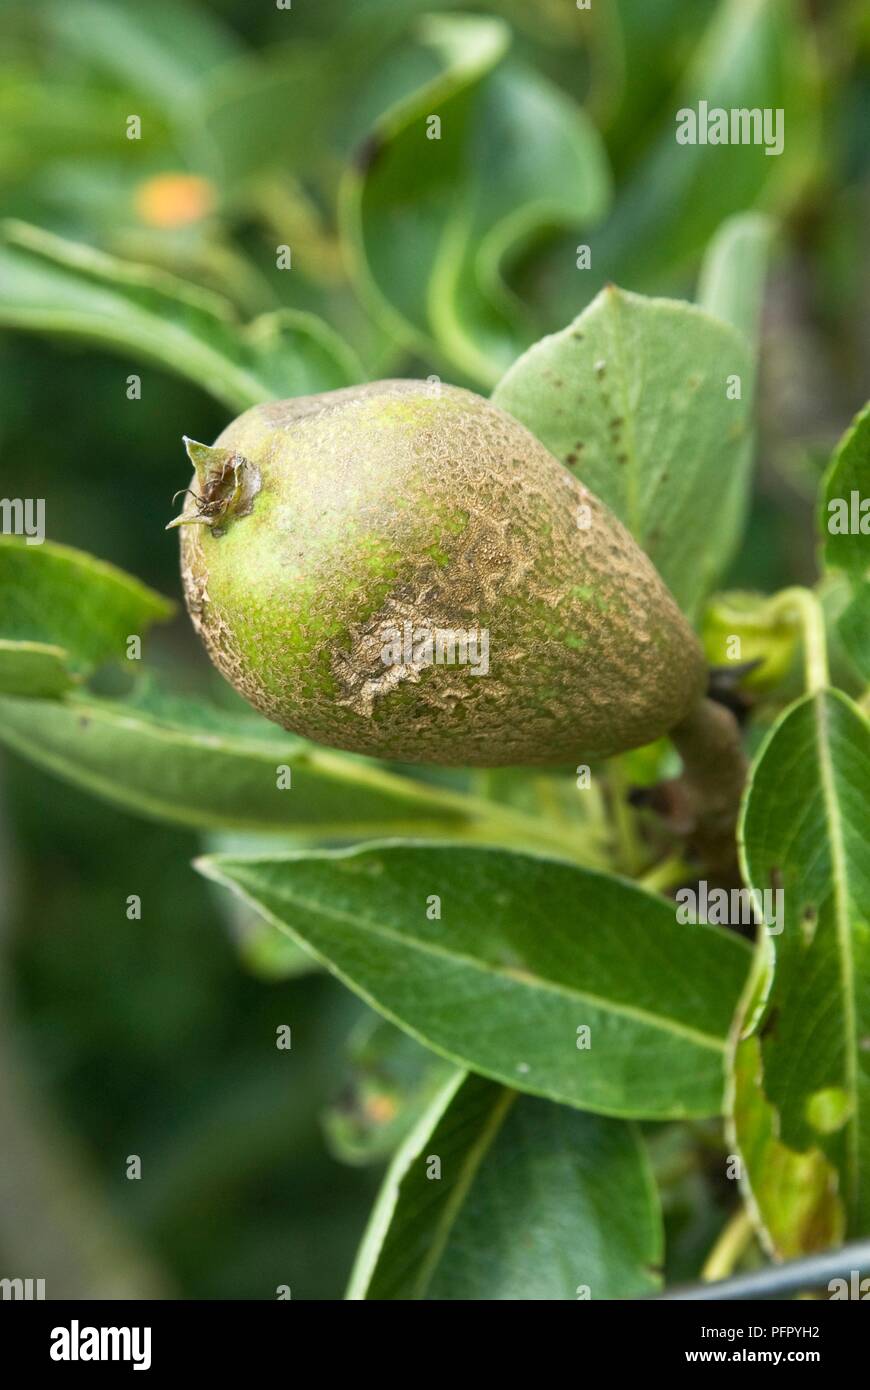 Pear affected by pear scab, close-up Stock Photo